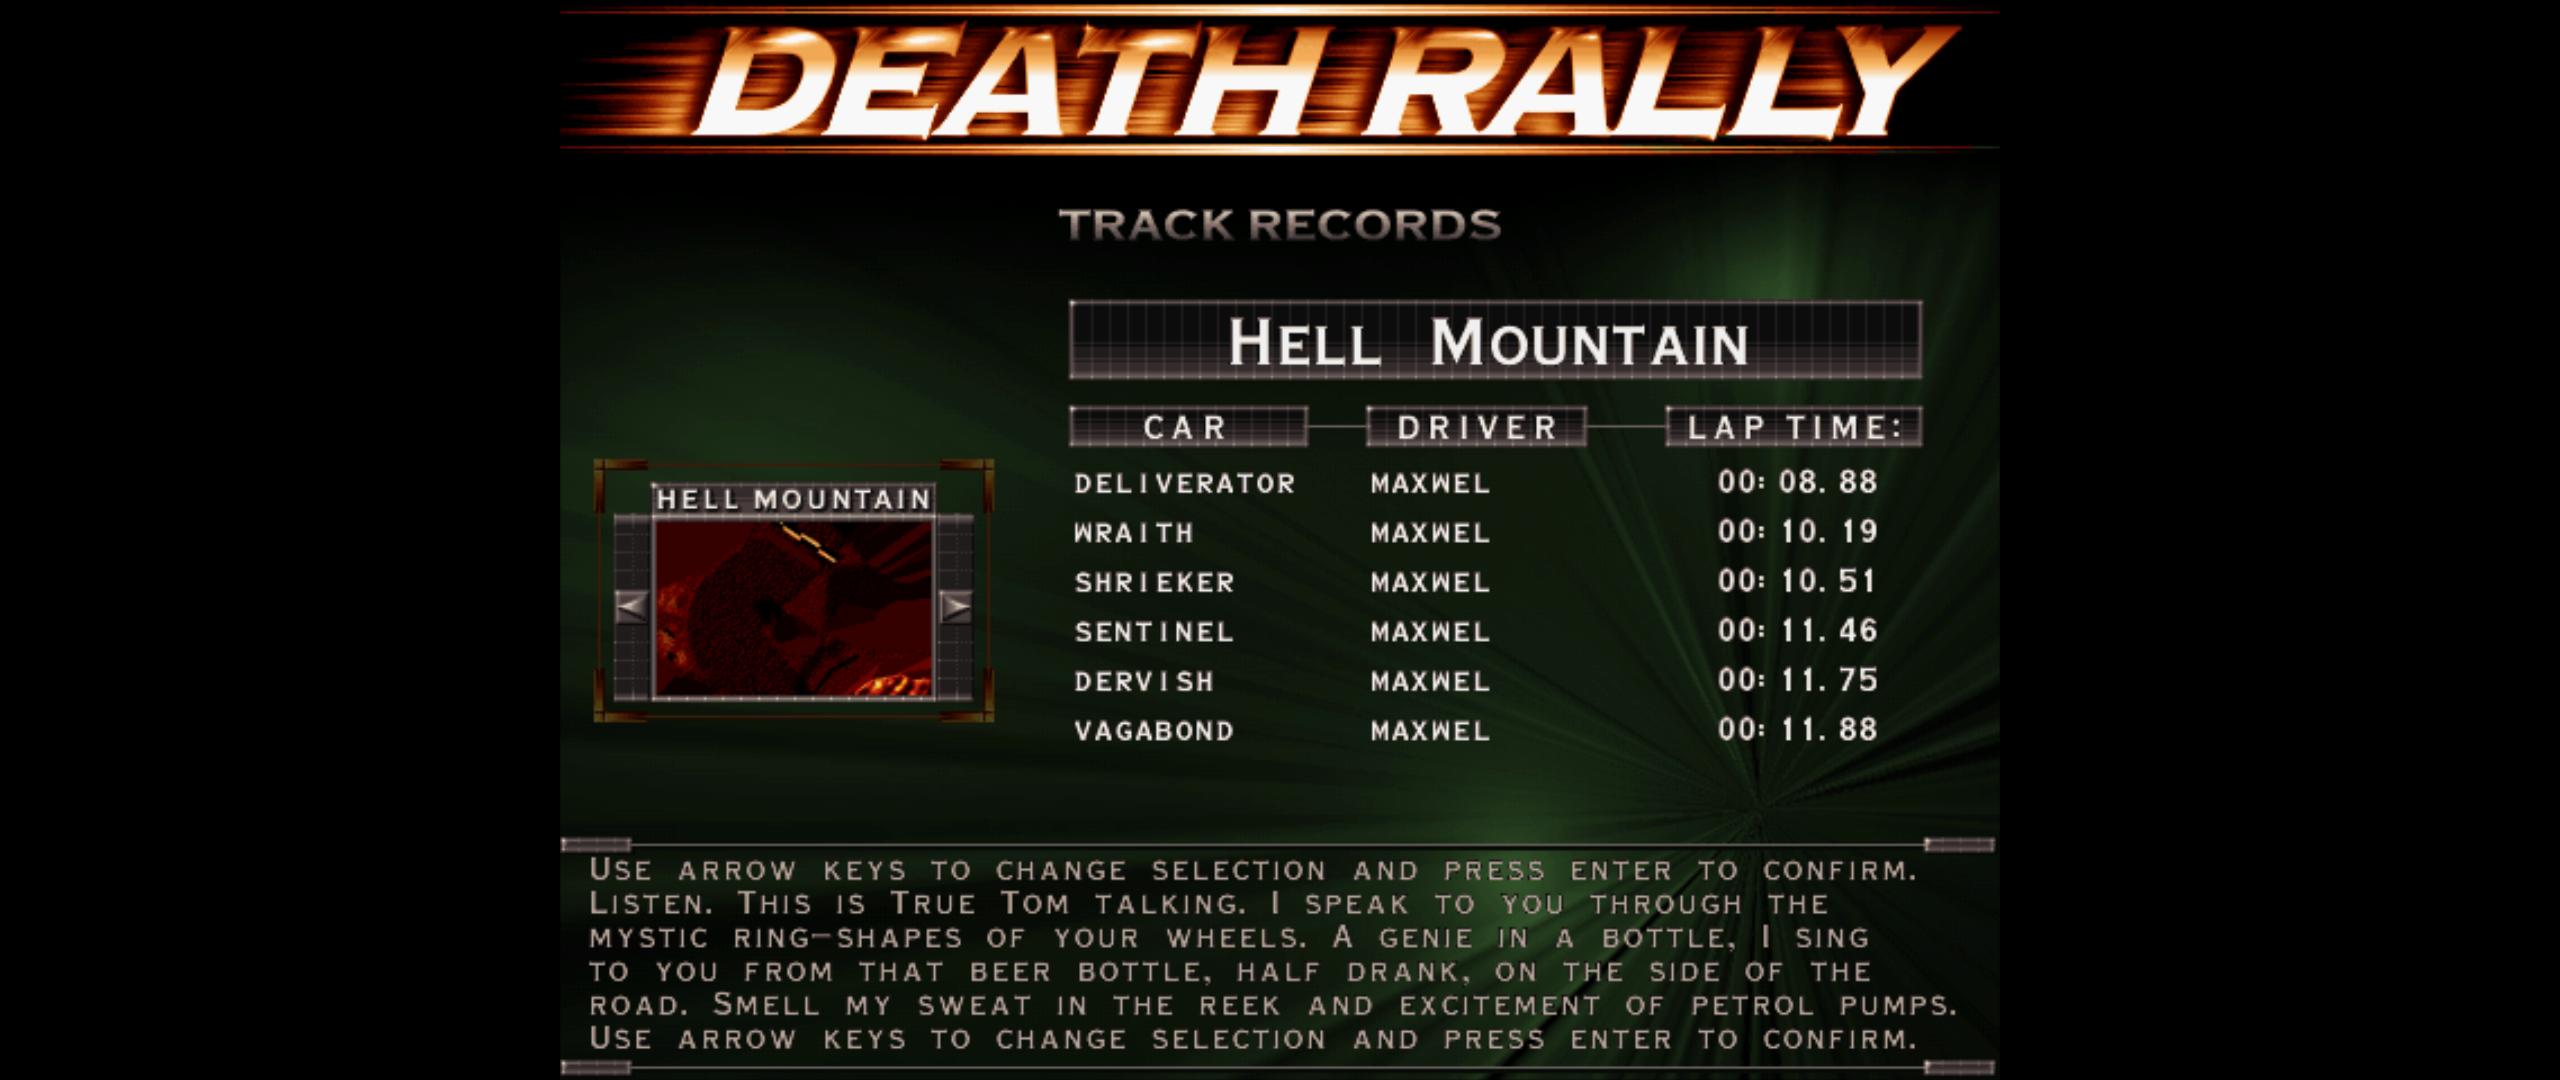 Maxwel: Death Rally [Hell Mountain, Sentinel Car] (PC) 0:00:11.46 points on 2016-03-04 05:51:19